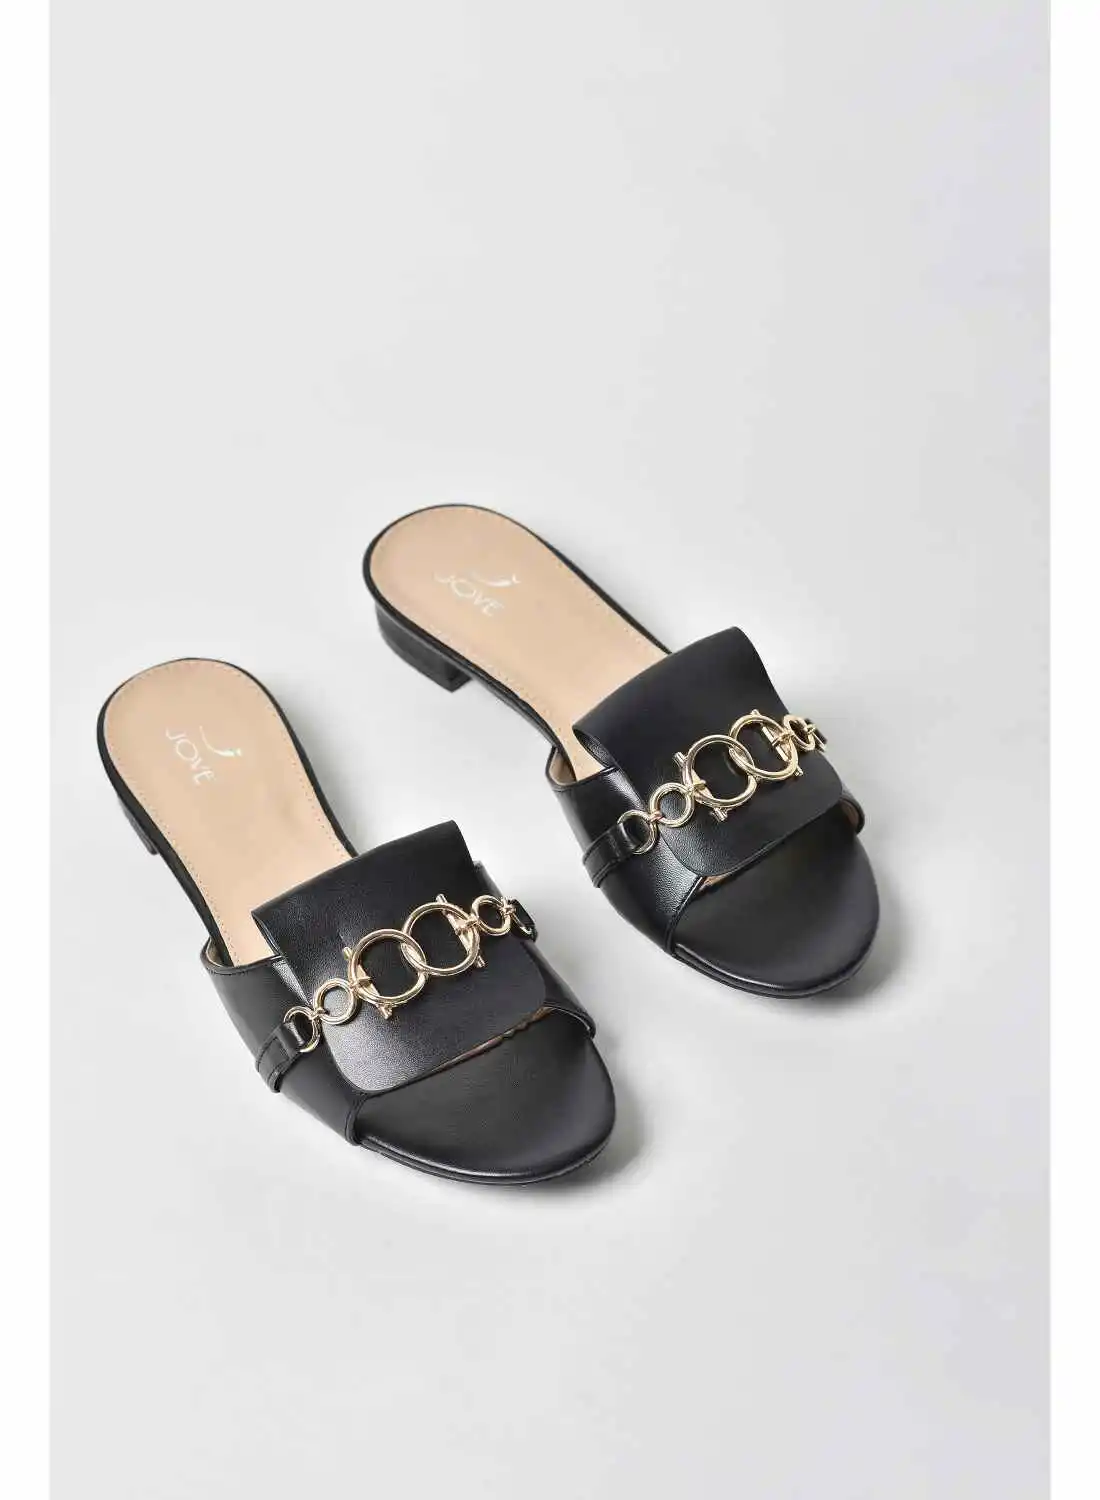 Jove Chain Detail Round Toe Casual Sandals Black/Gold